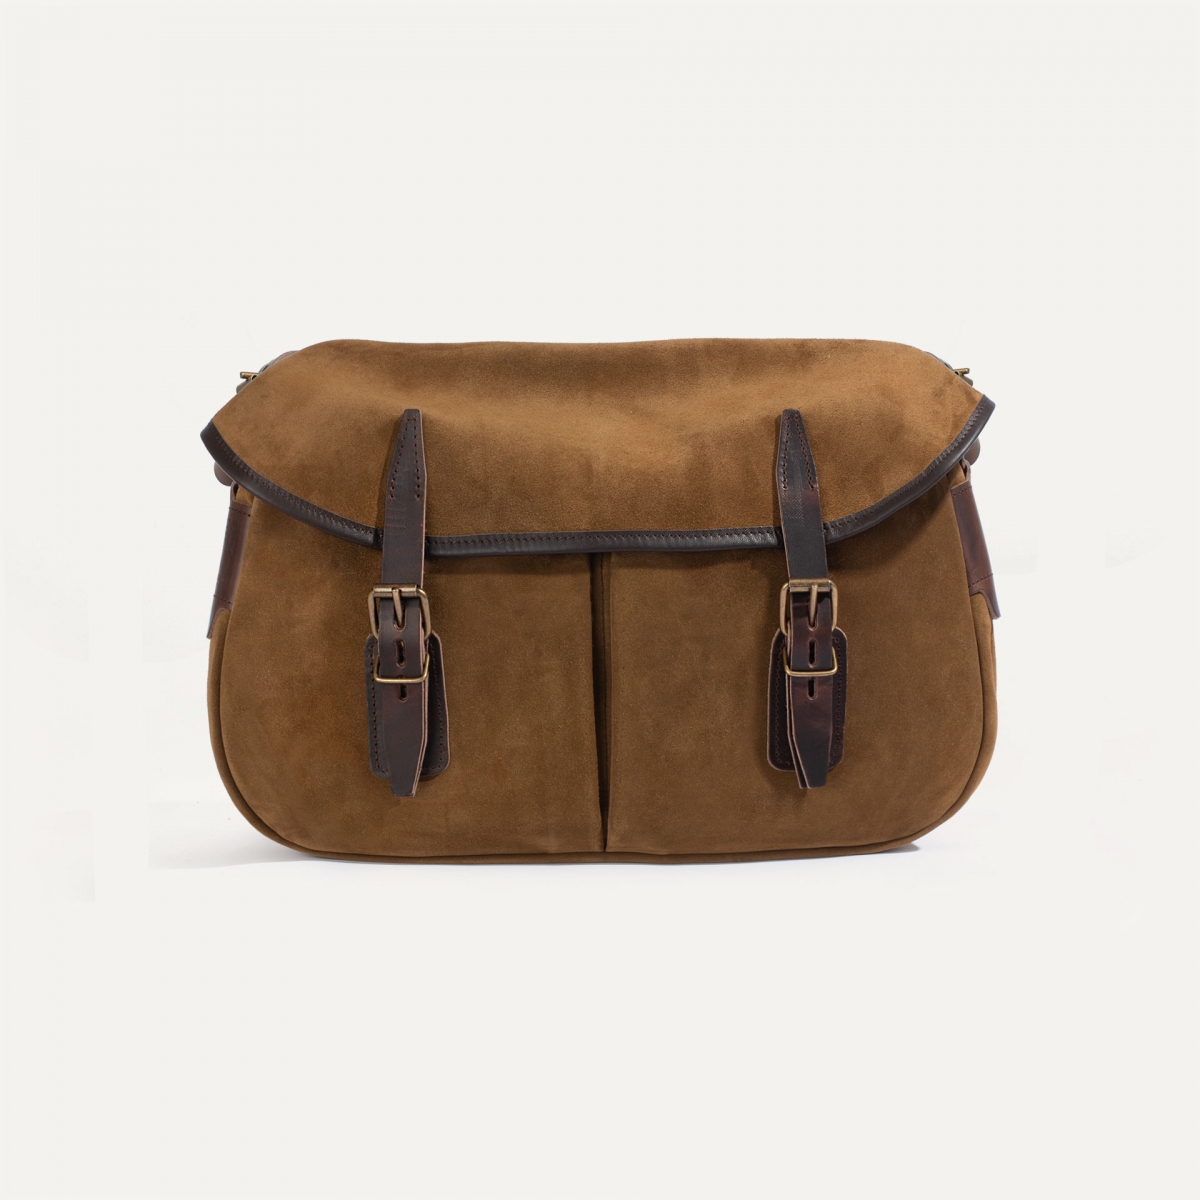 Fisherman's Musette S / Suede - Tobacco - satchel bag for men and